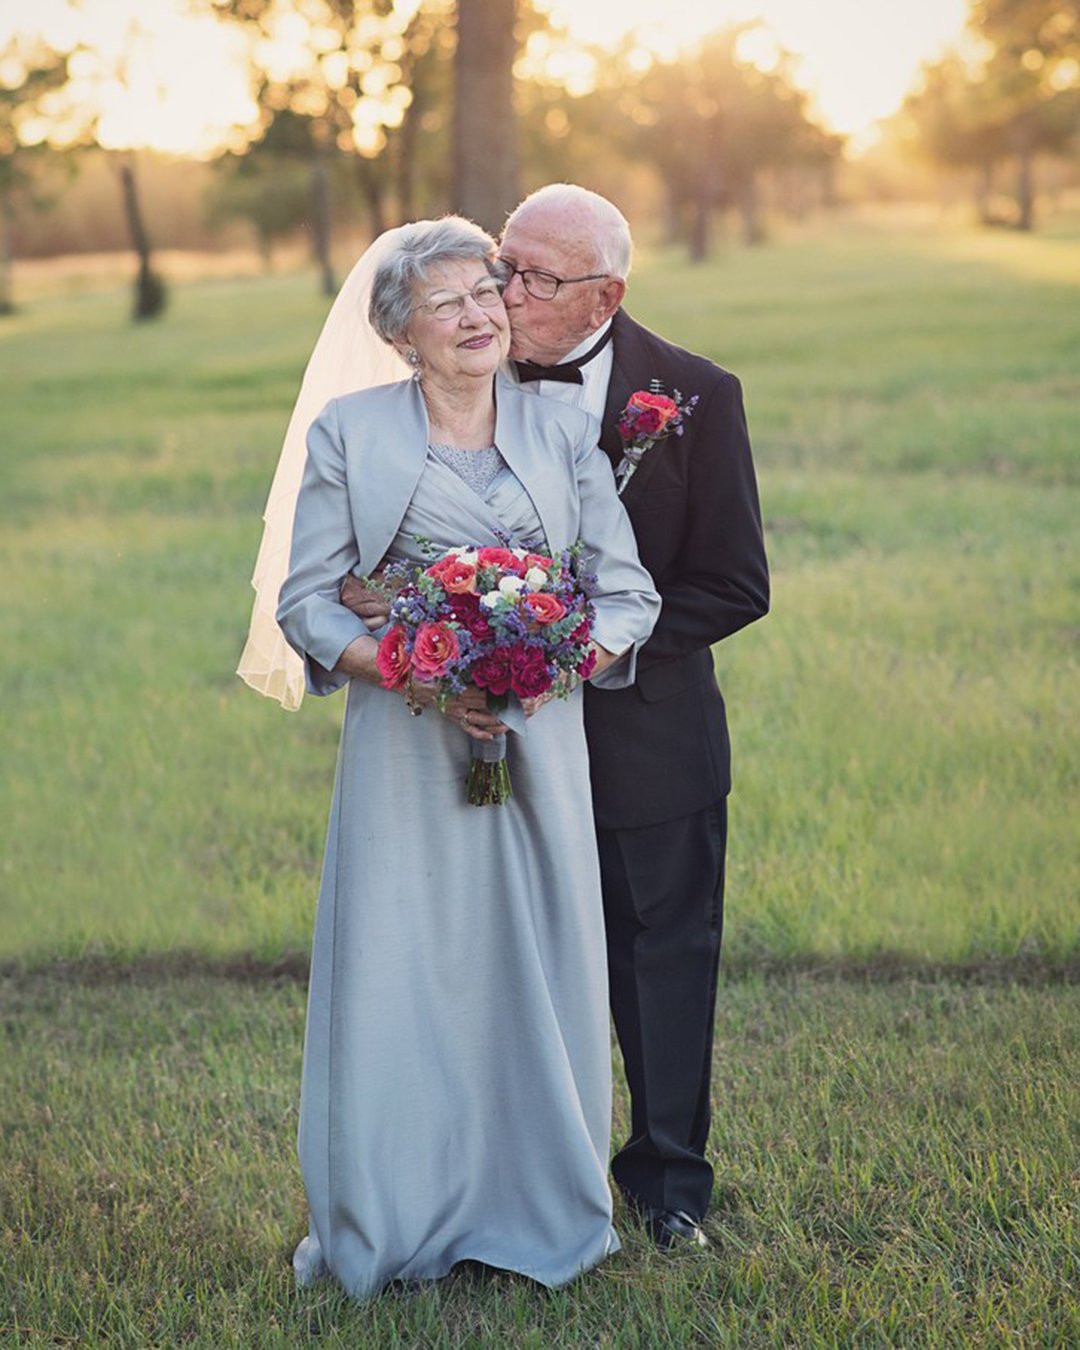 Second marriage at 50